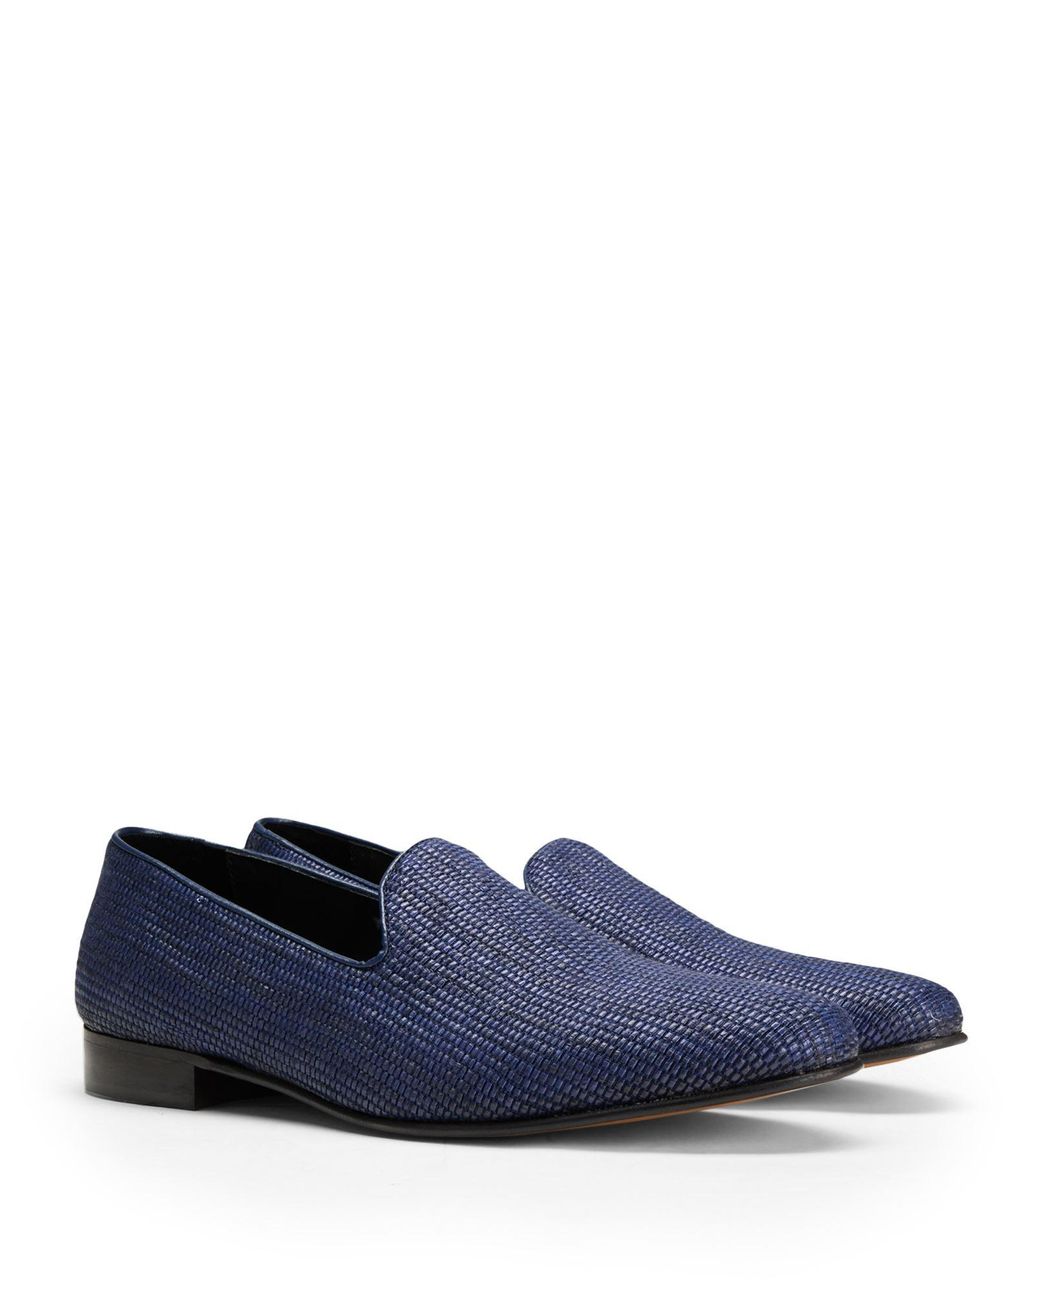 8 by YOOX Loafer in Dark Blue (Blue) for Men | Lyst